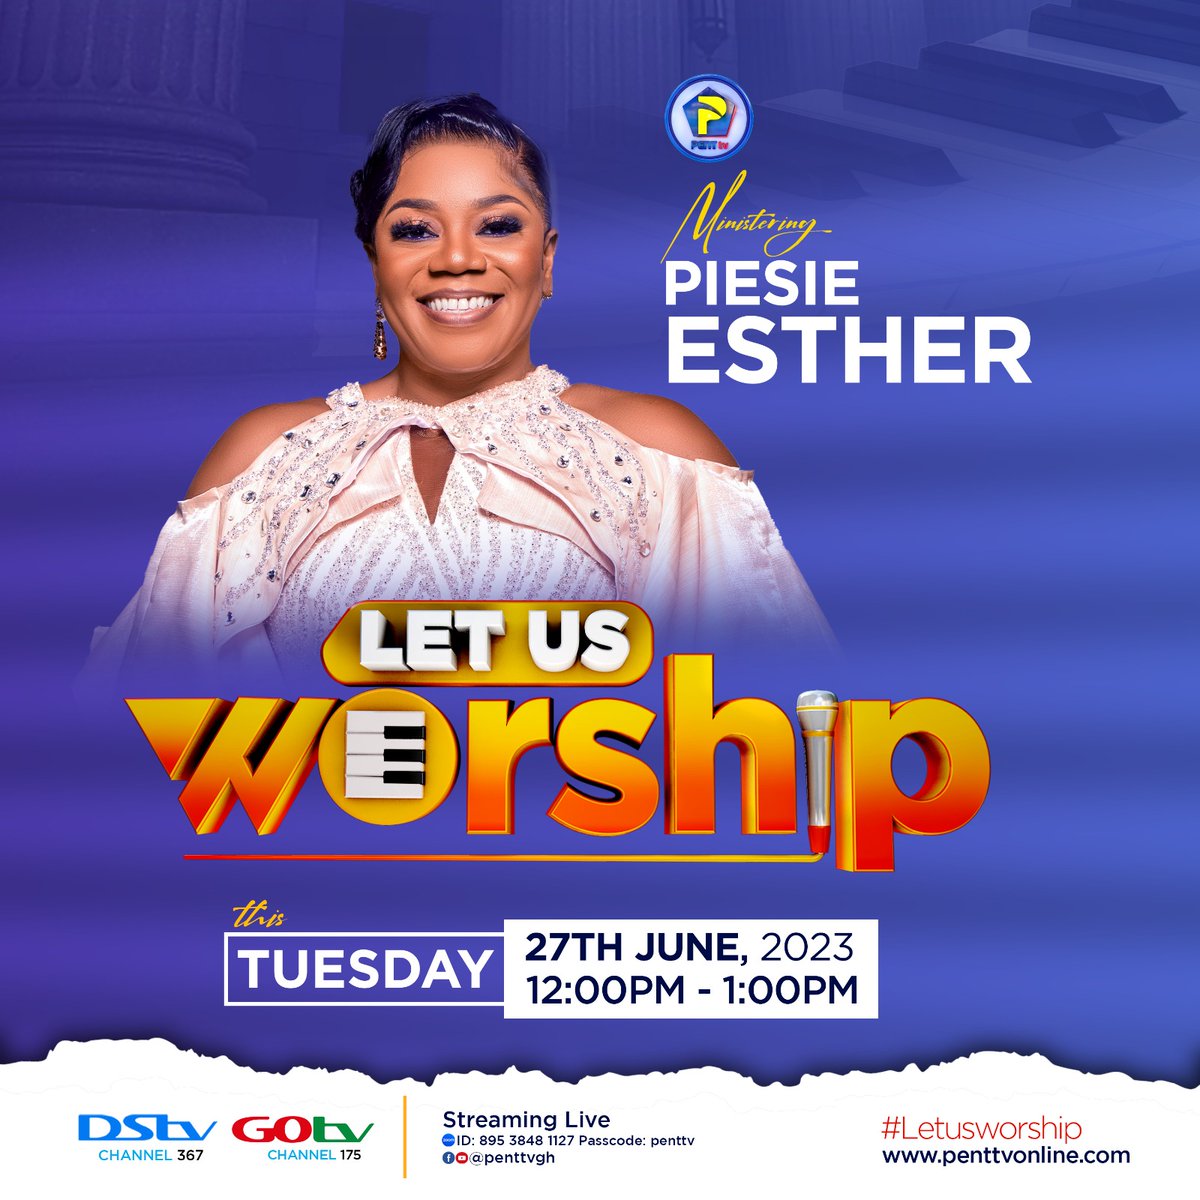 🔥 Join us tomorrow for an incredible worship session led by Piesie Esther on 'Let Us Worship'! 🎶

📺 Catch the live program on PENT TV and immerse yourself in the beauty of praise. Spread the word!

#LetUsWorship | #MaximumImpact | #PossessingtheNations